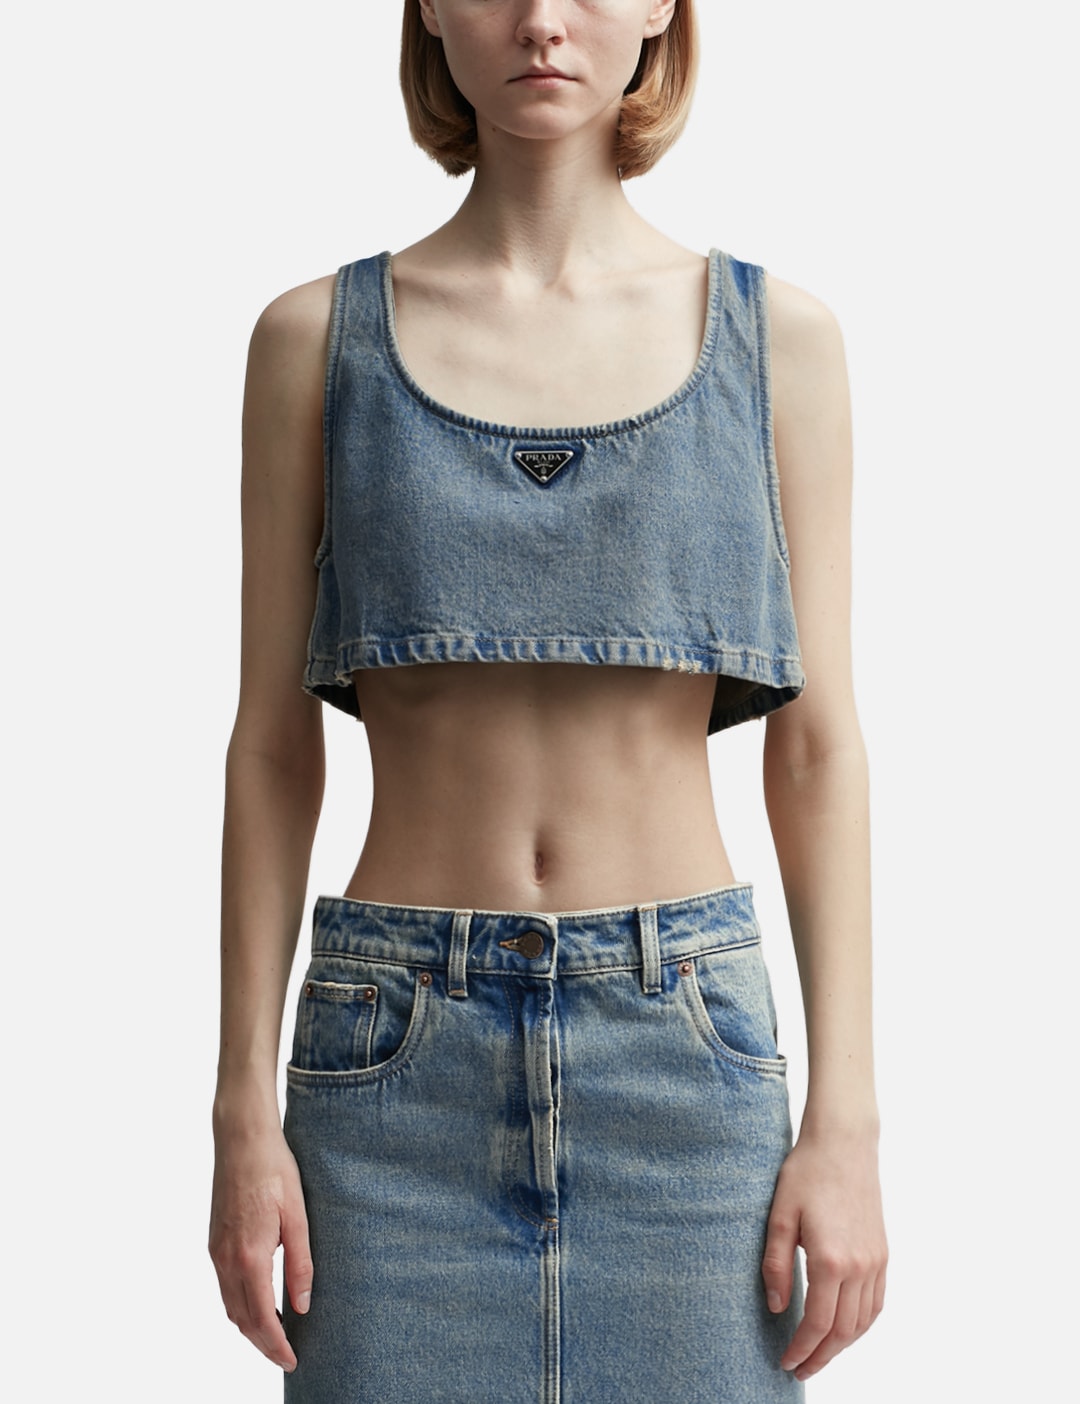 Prada - Denim Top  HBX - Globally Curated Fashion and Lifestyle by  Hypebeast